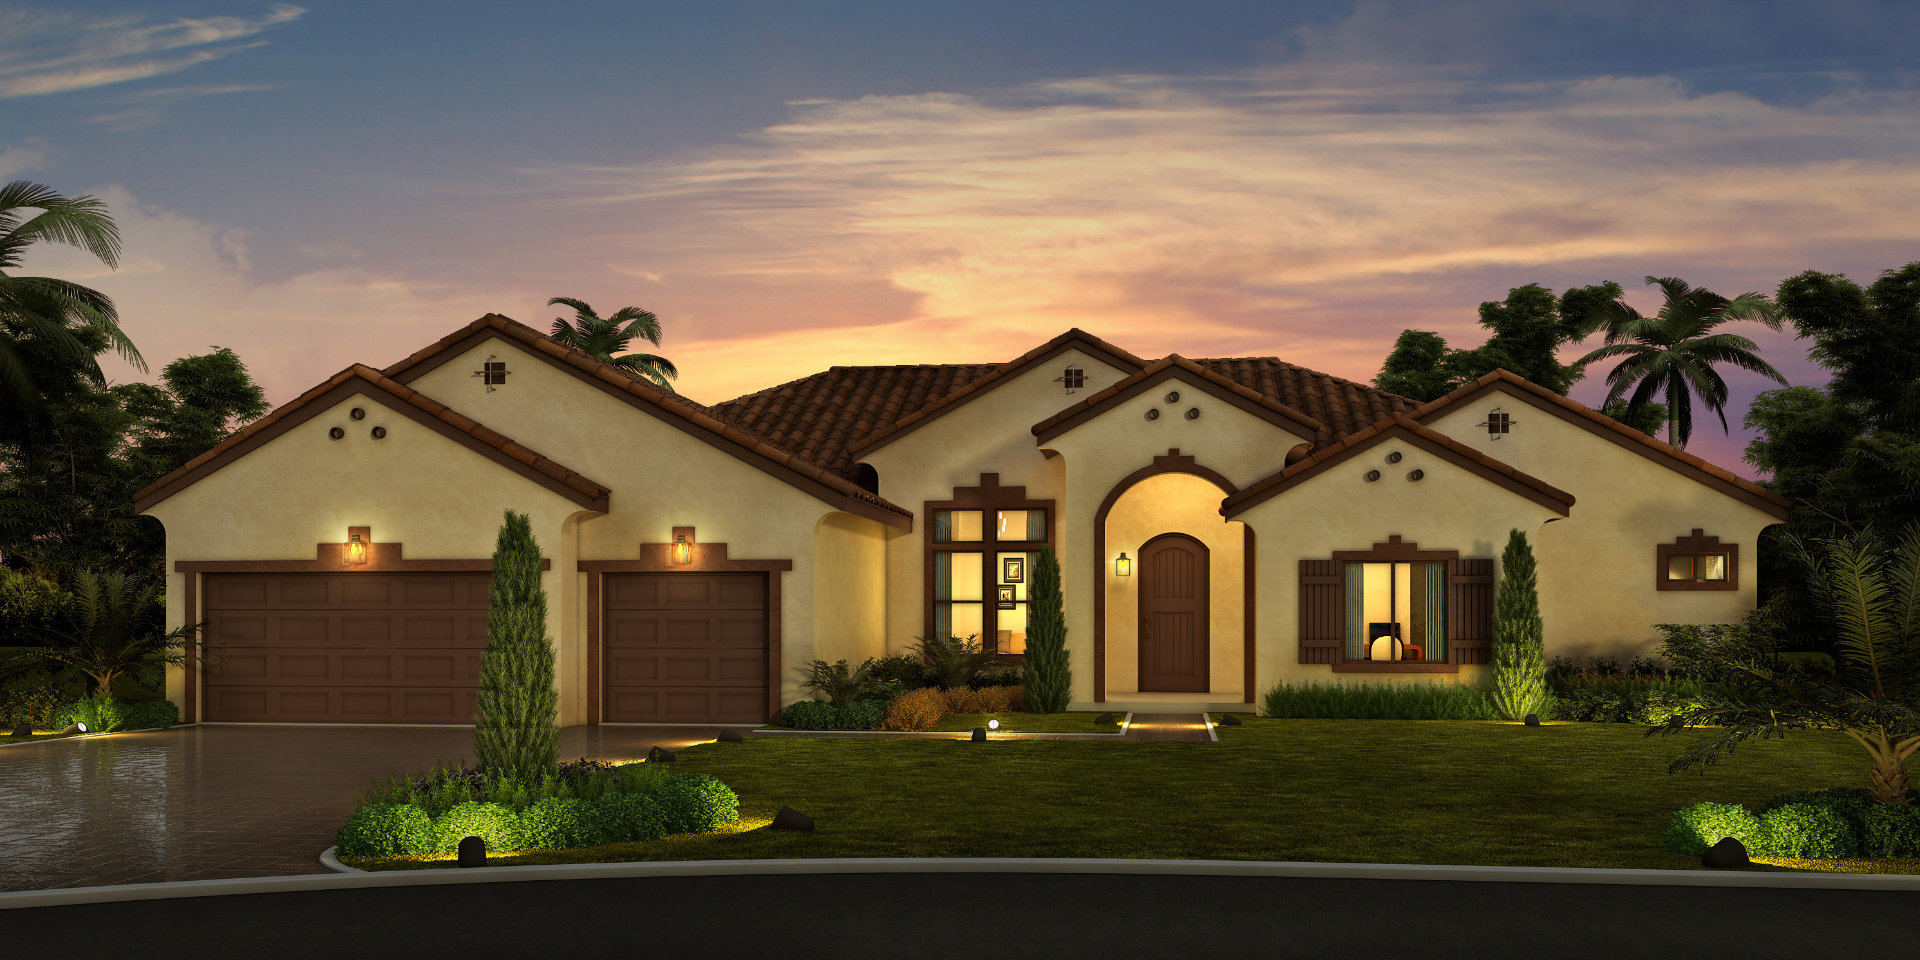 Tan home at dusk with lights on in Fresno, California